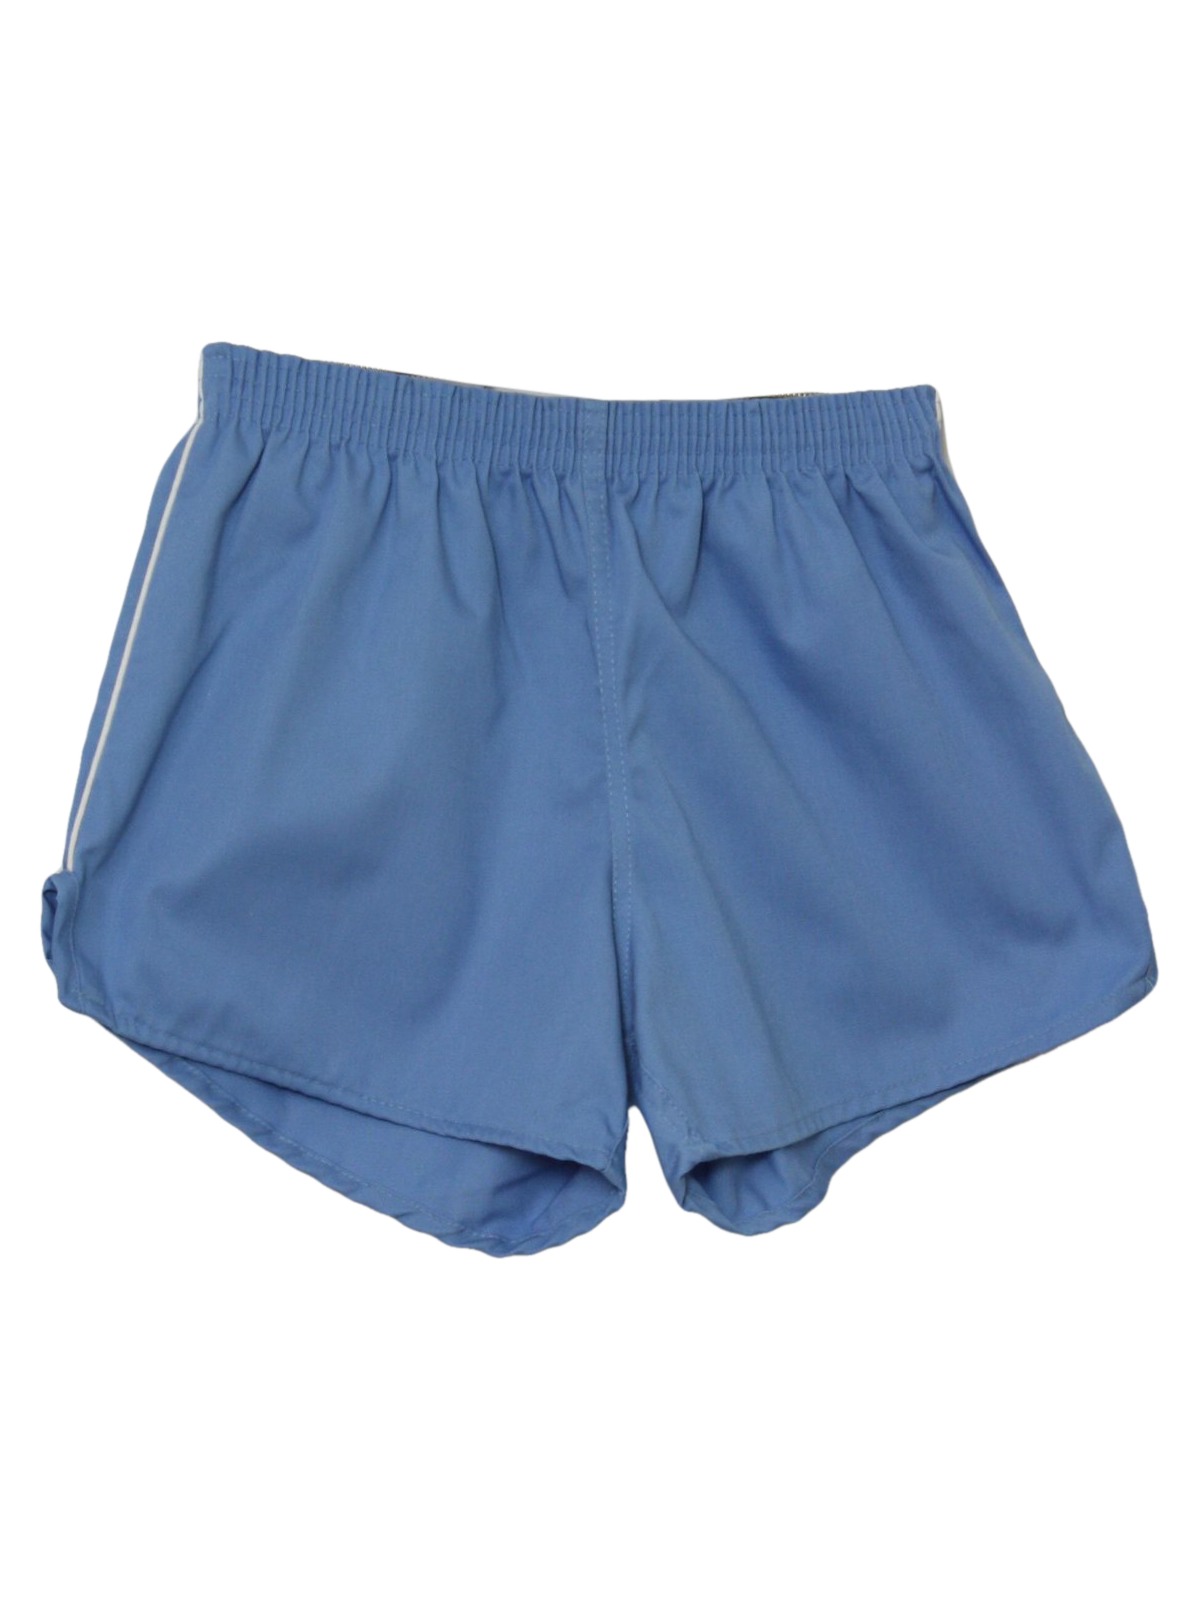 1980's Retro Shorts: 80s -Soffe- Mens light blue background polyester ...